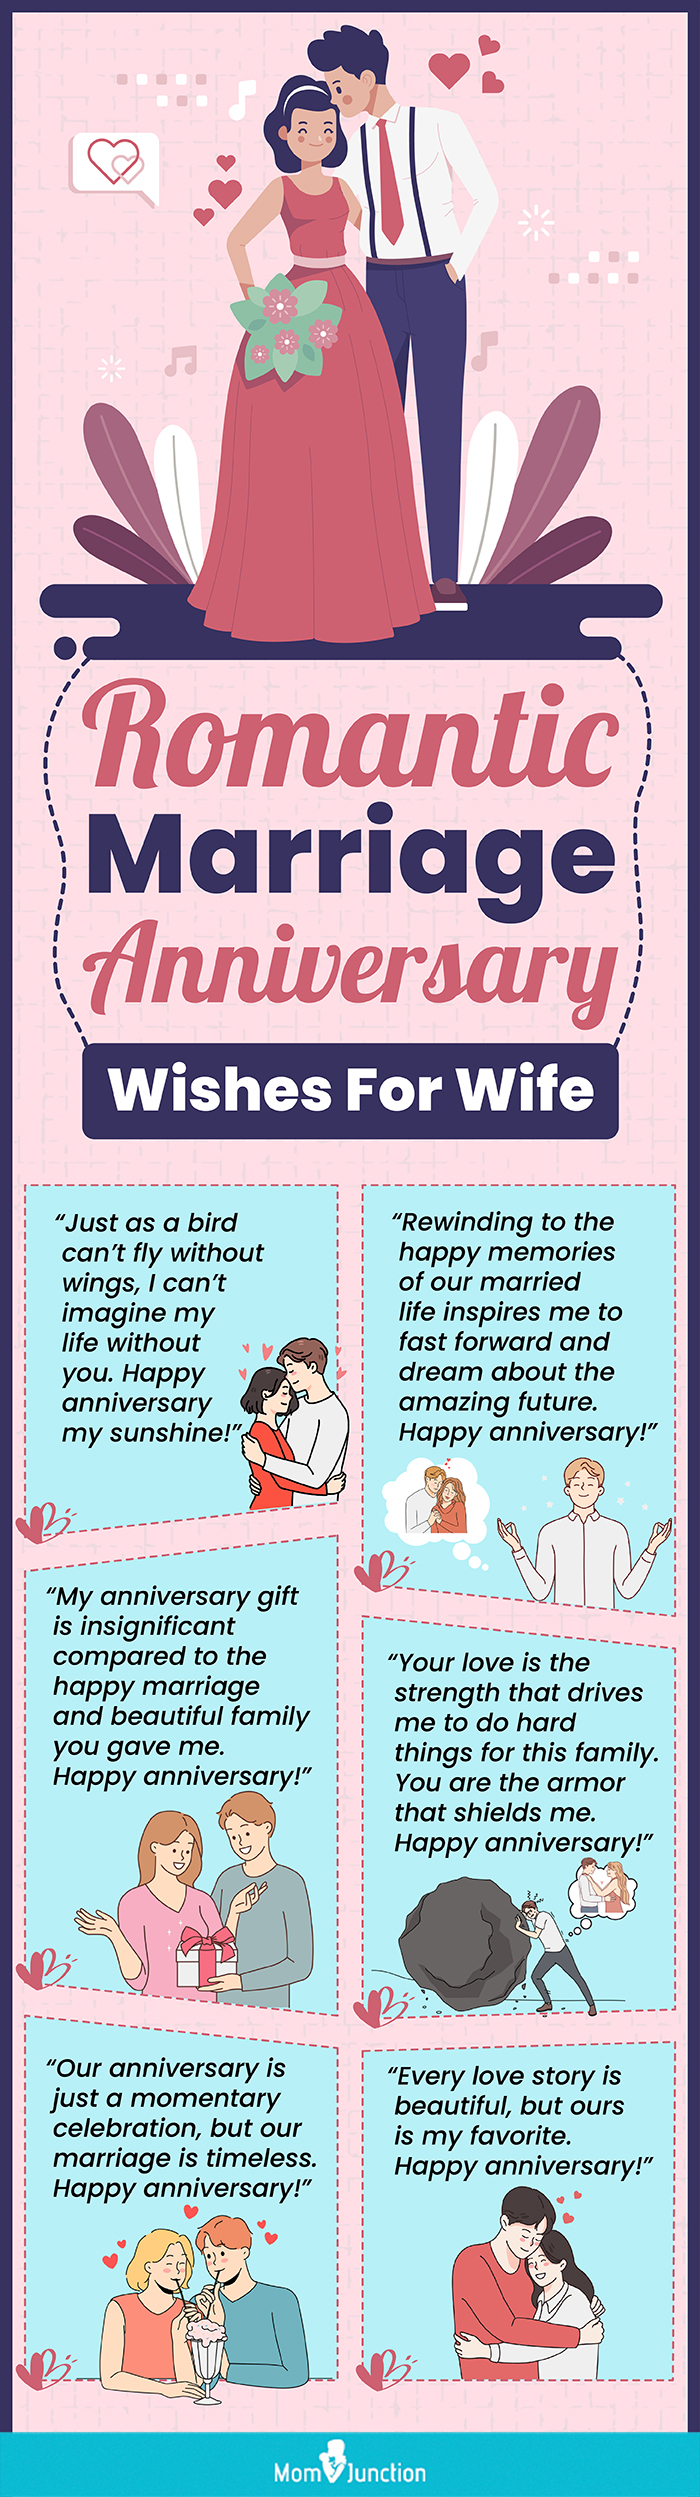 Say It Right: Happy Anniversary Wishes and Wedding Anniversary